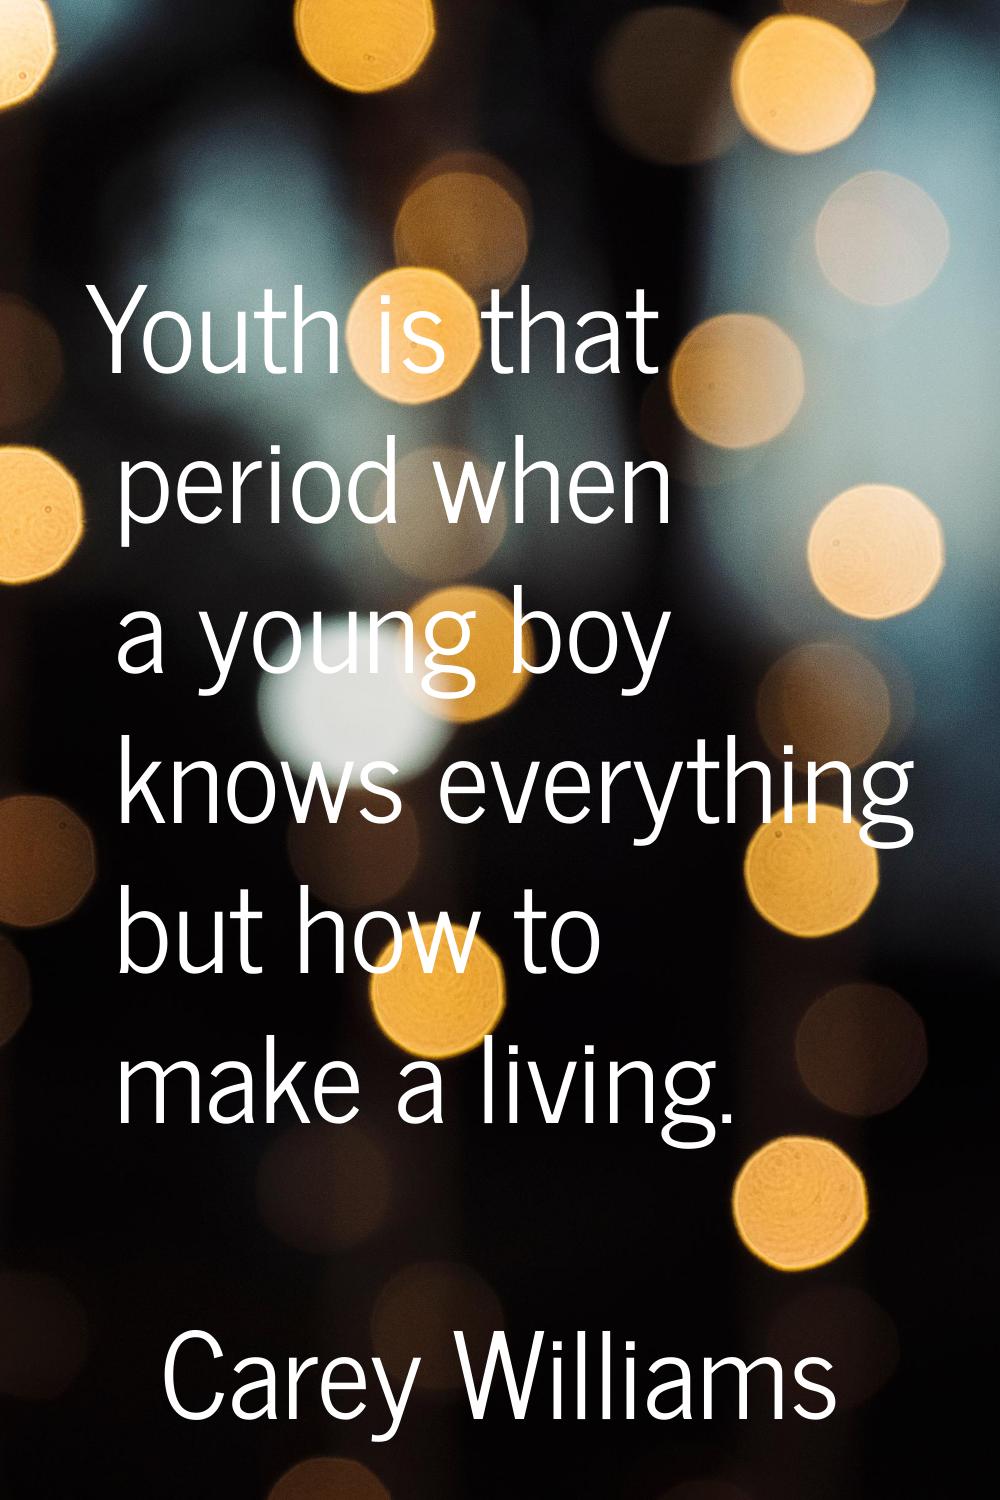 Youth is that period when a young boy knows everything but how to make a living.